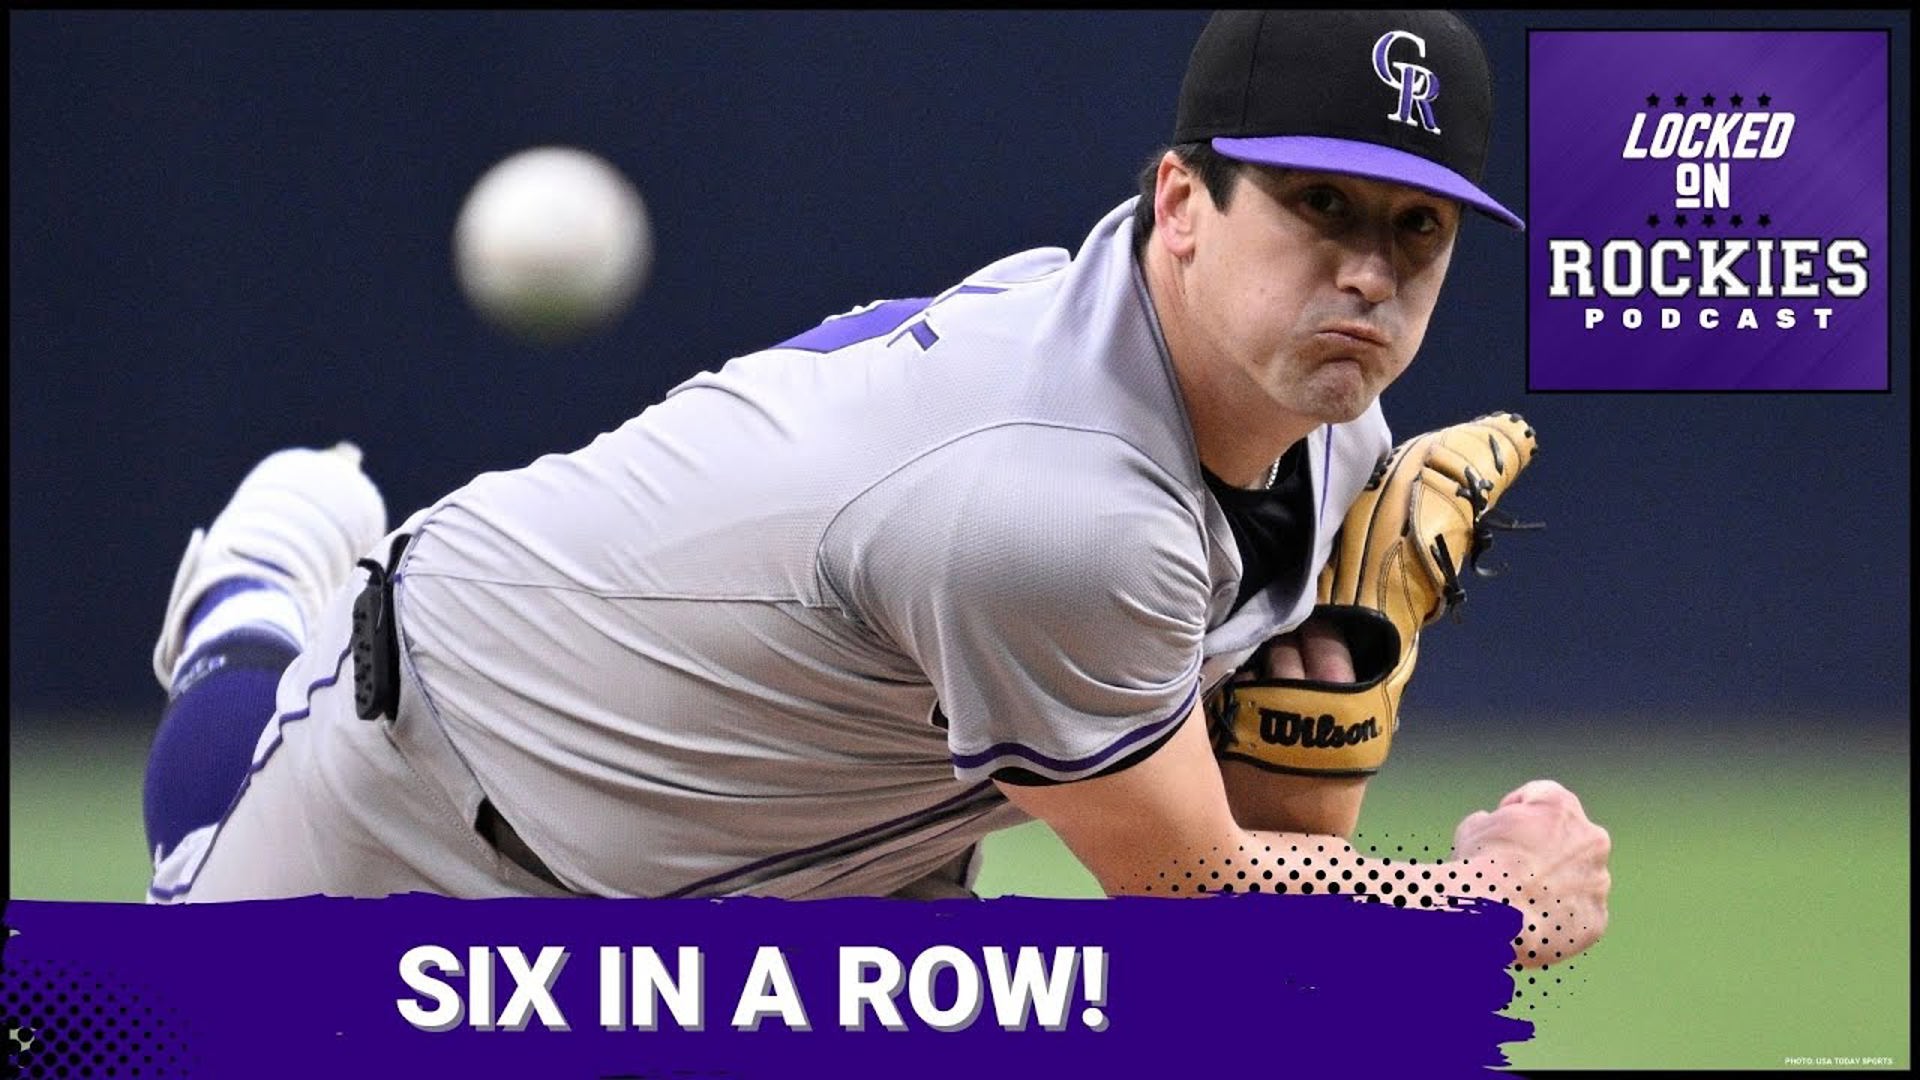 Cal Quantrill goes pitch for pitch against Dylan Cease and the Colorado Rockies win their second series in a row